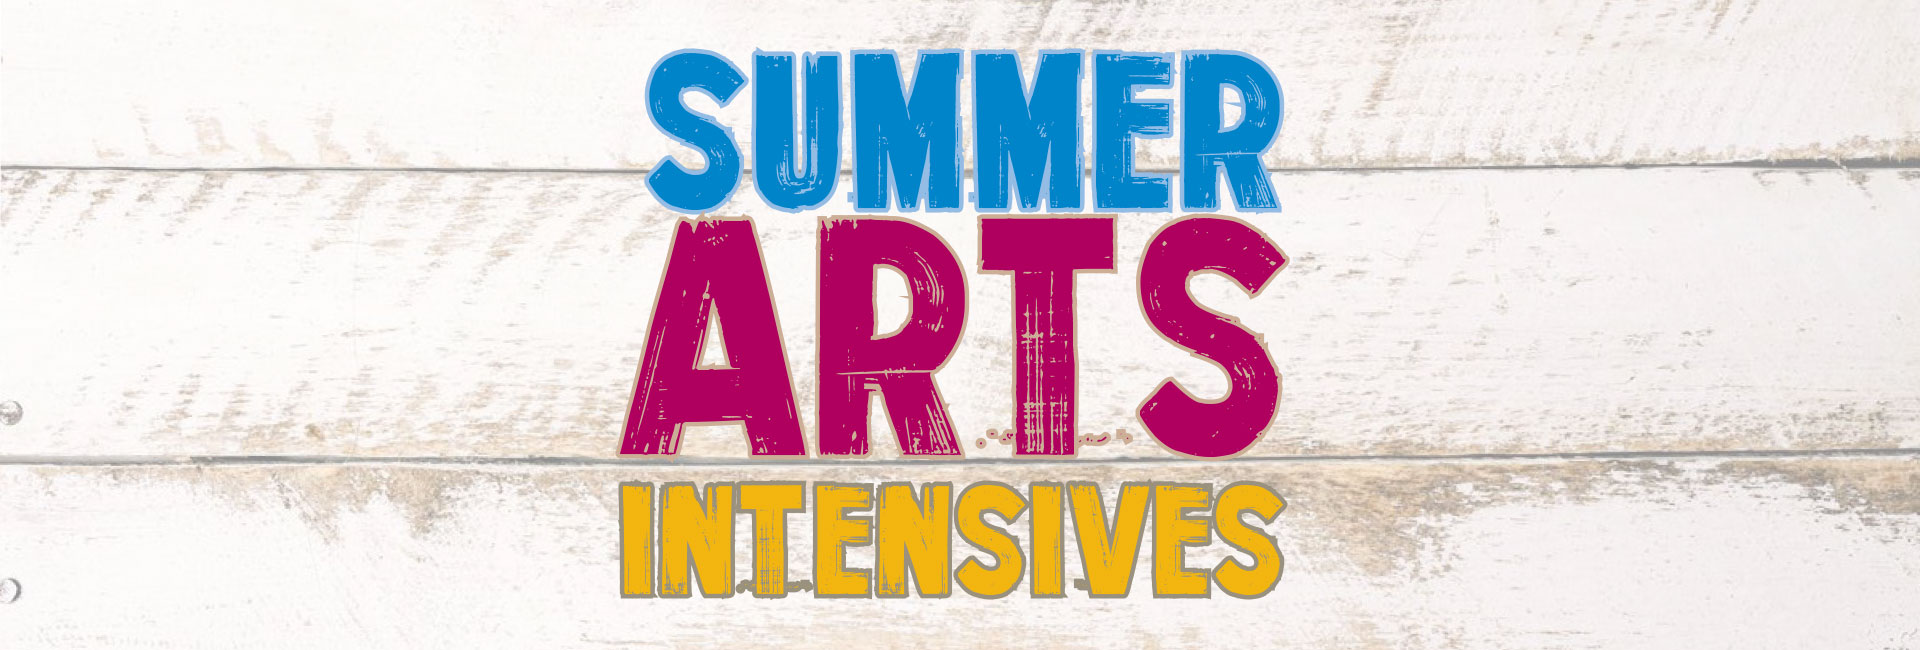 summer arts intensives in bright colors on wooden fence